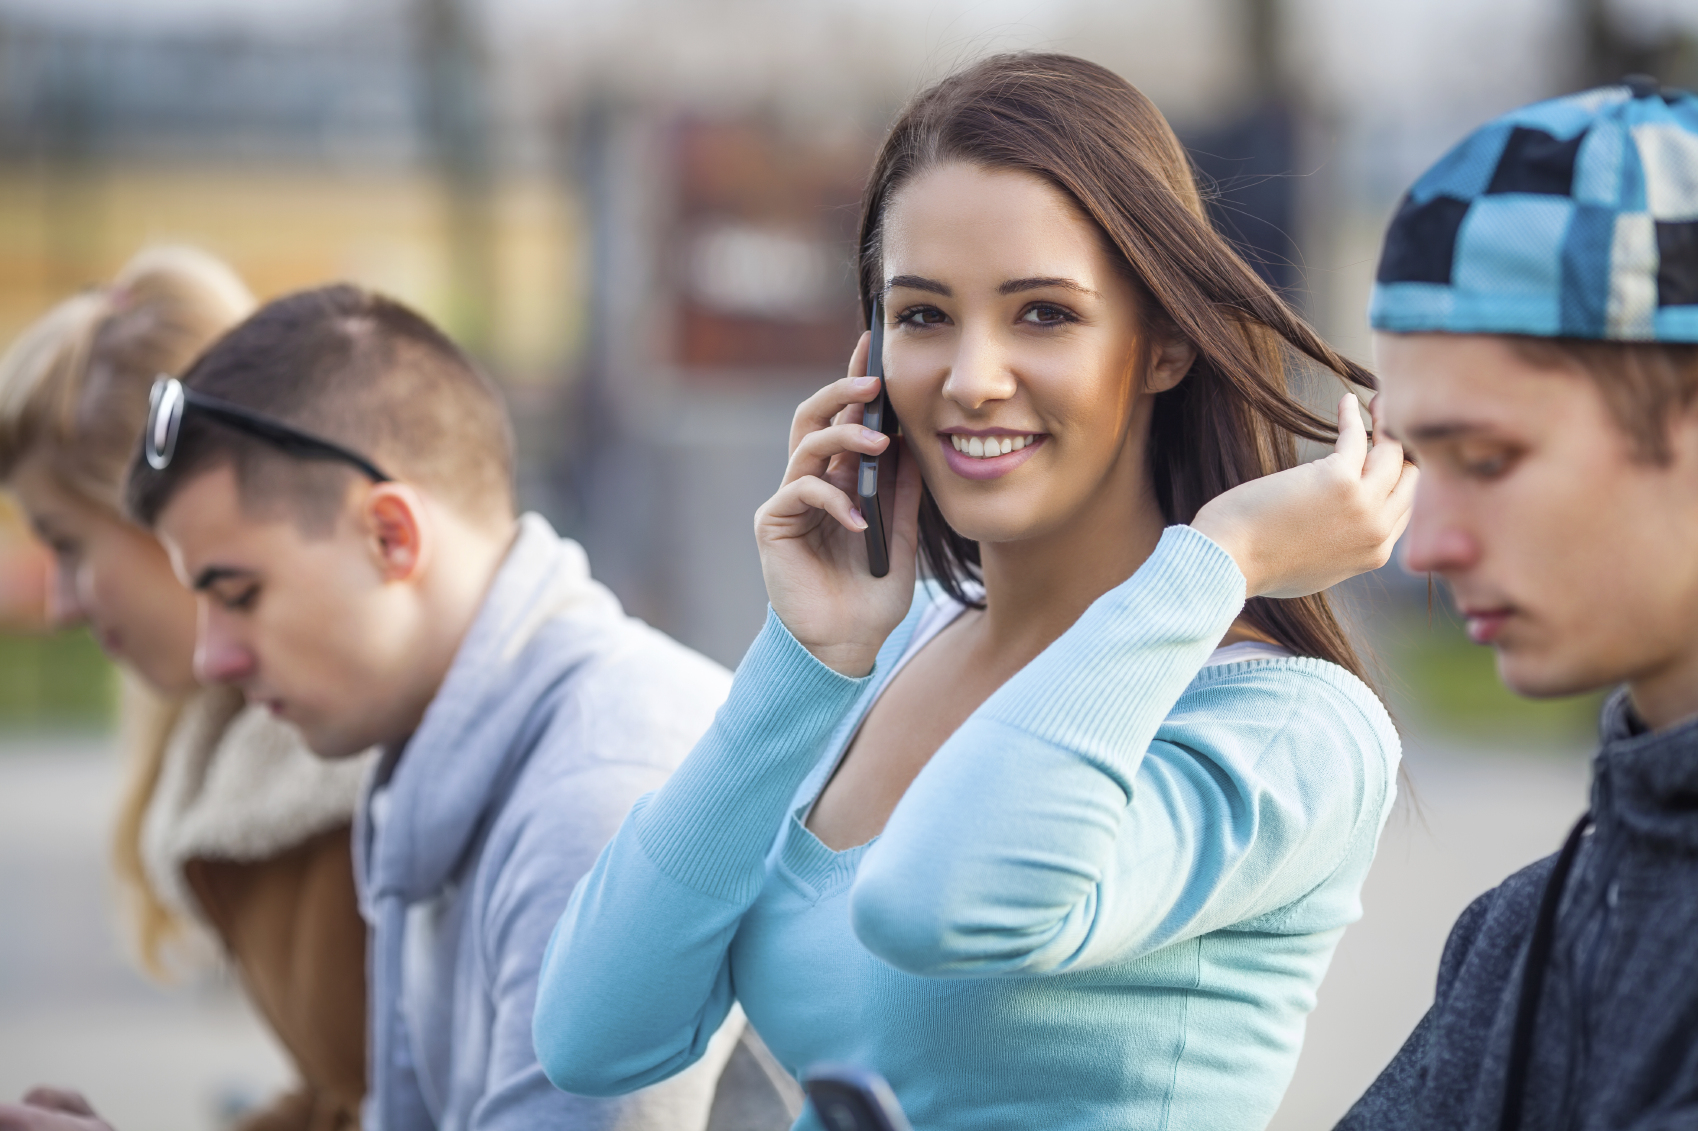 Portrait of beautiful young woman talking on the phone with her friends in the background using their mobile phones